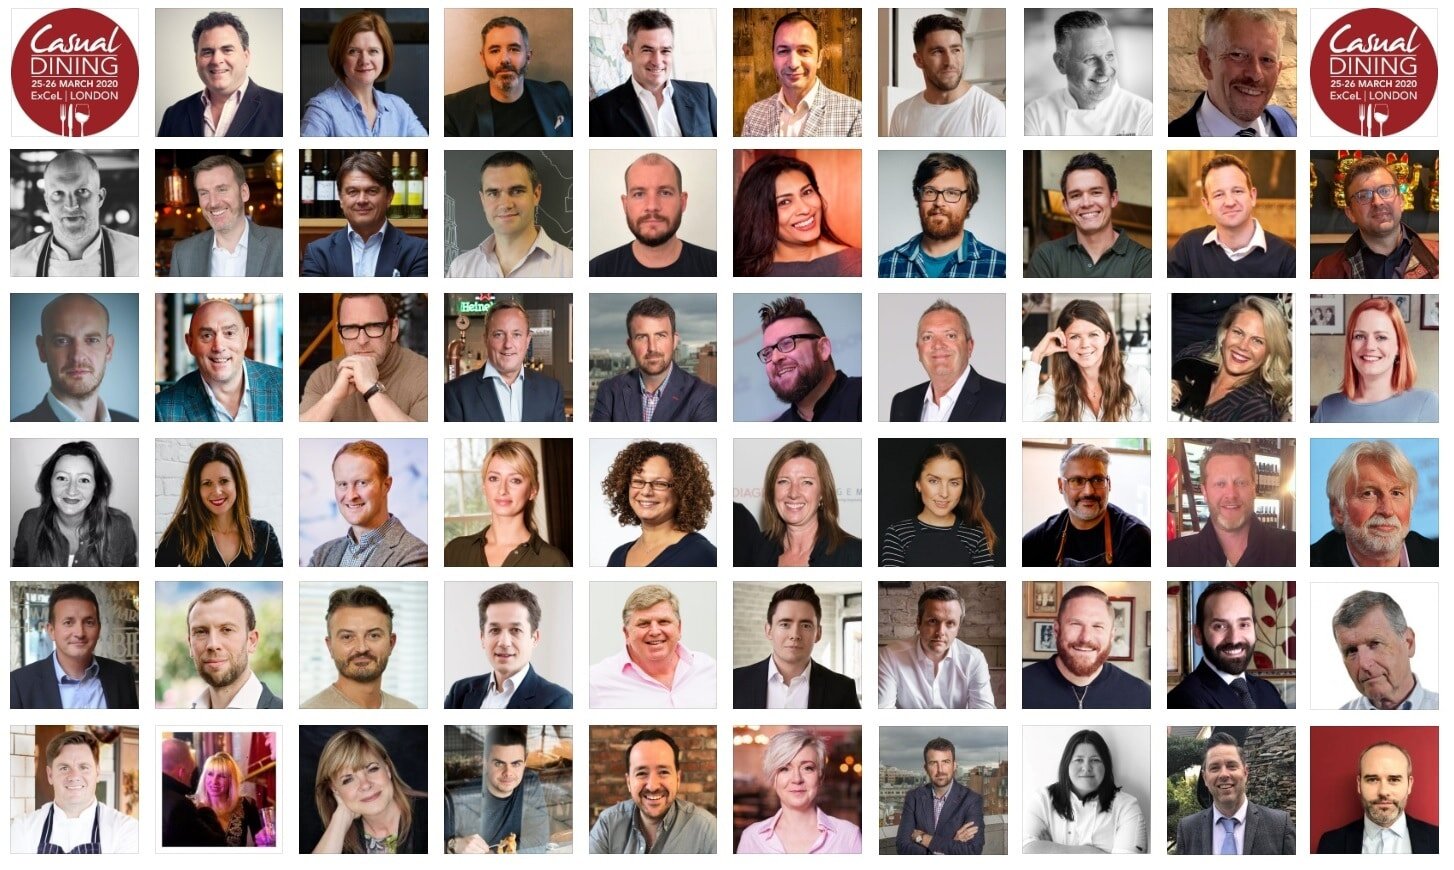 Speakers confirmed for Casual Dining 2020